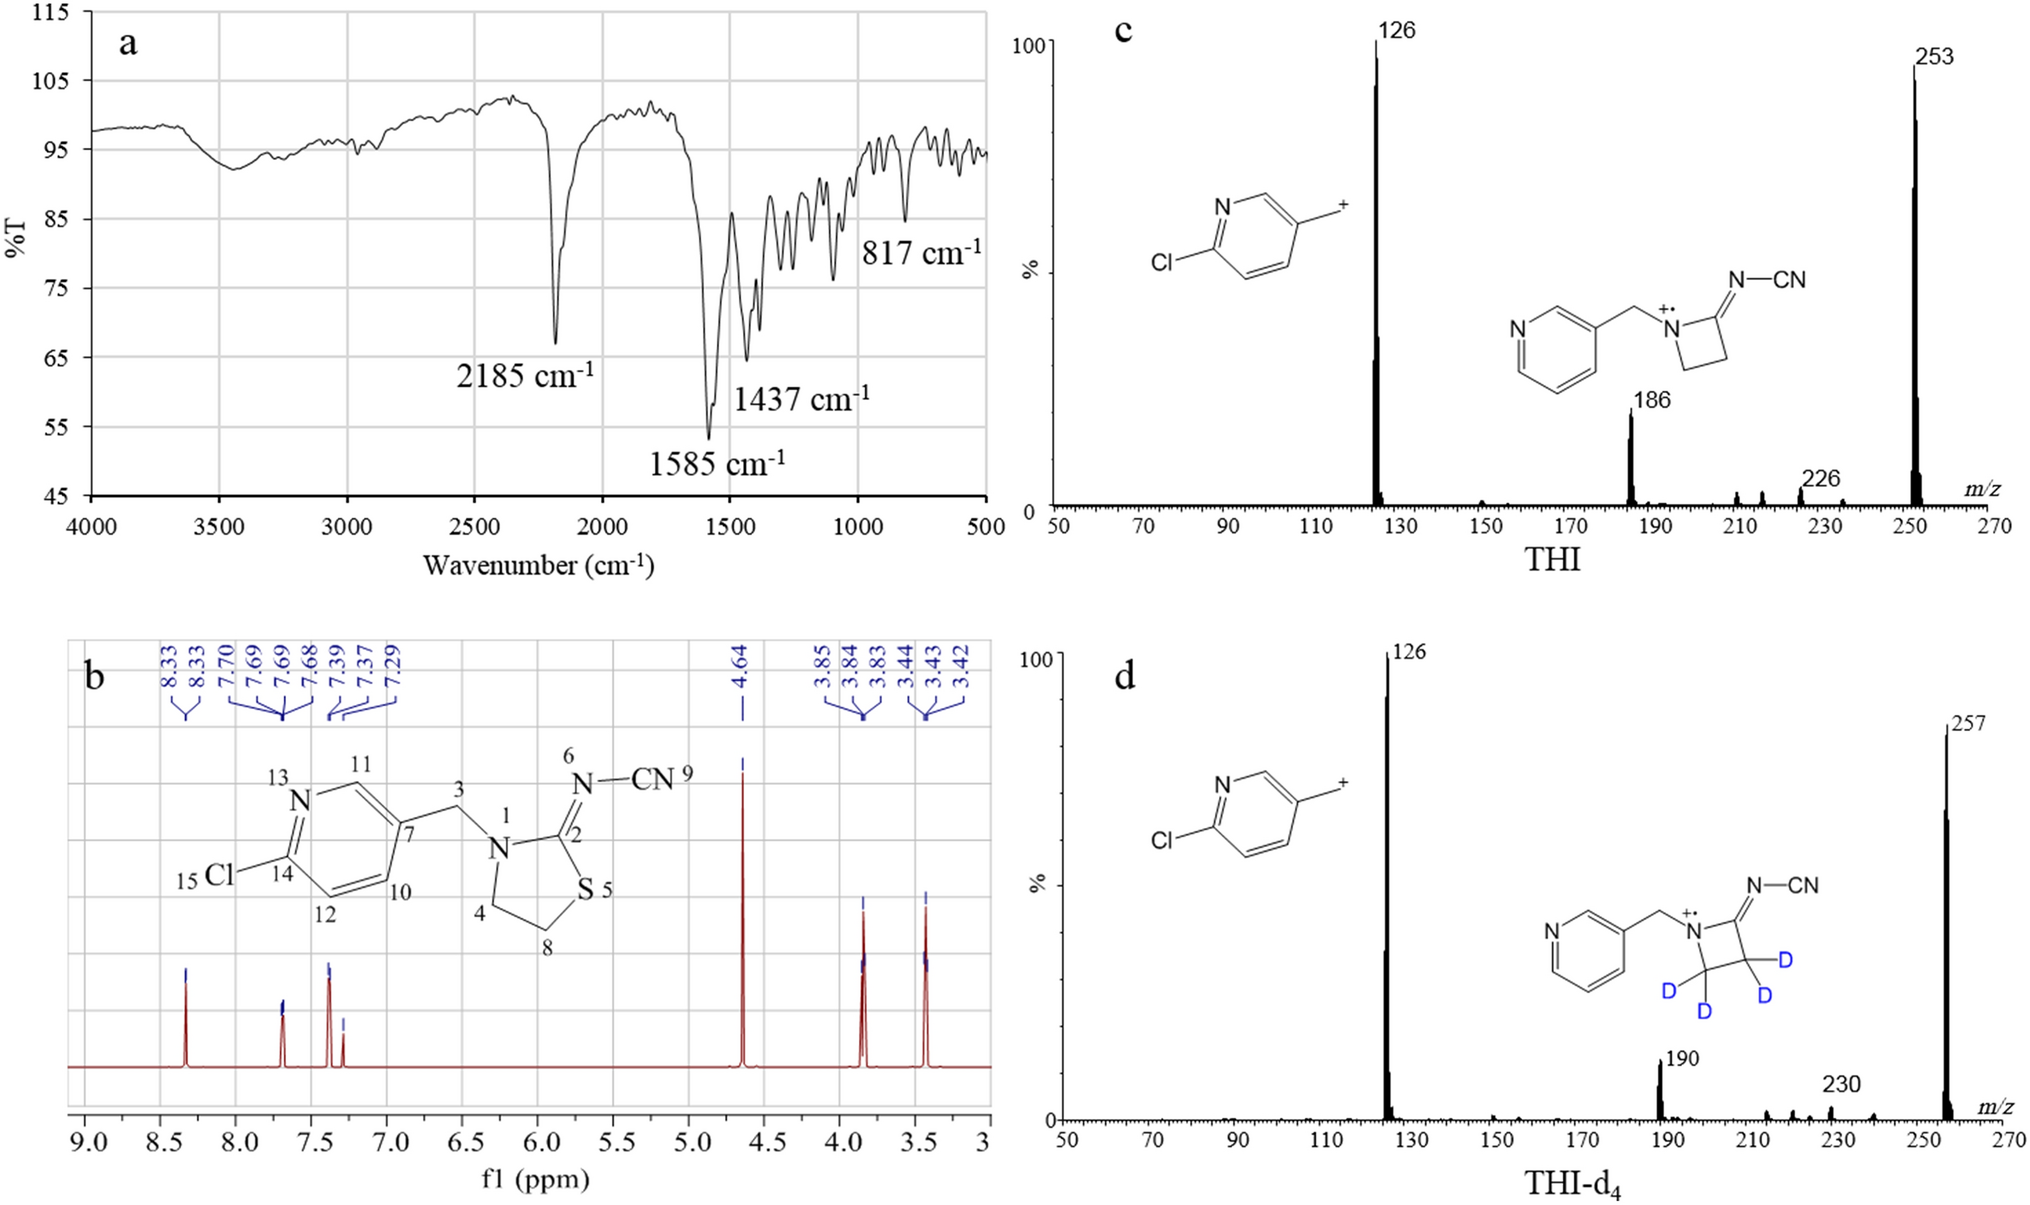 Accurate Quantification of Pure Thiacloprid with Mass Balance and Quantitative H-NMR